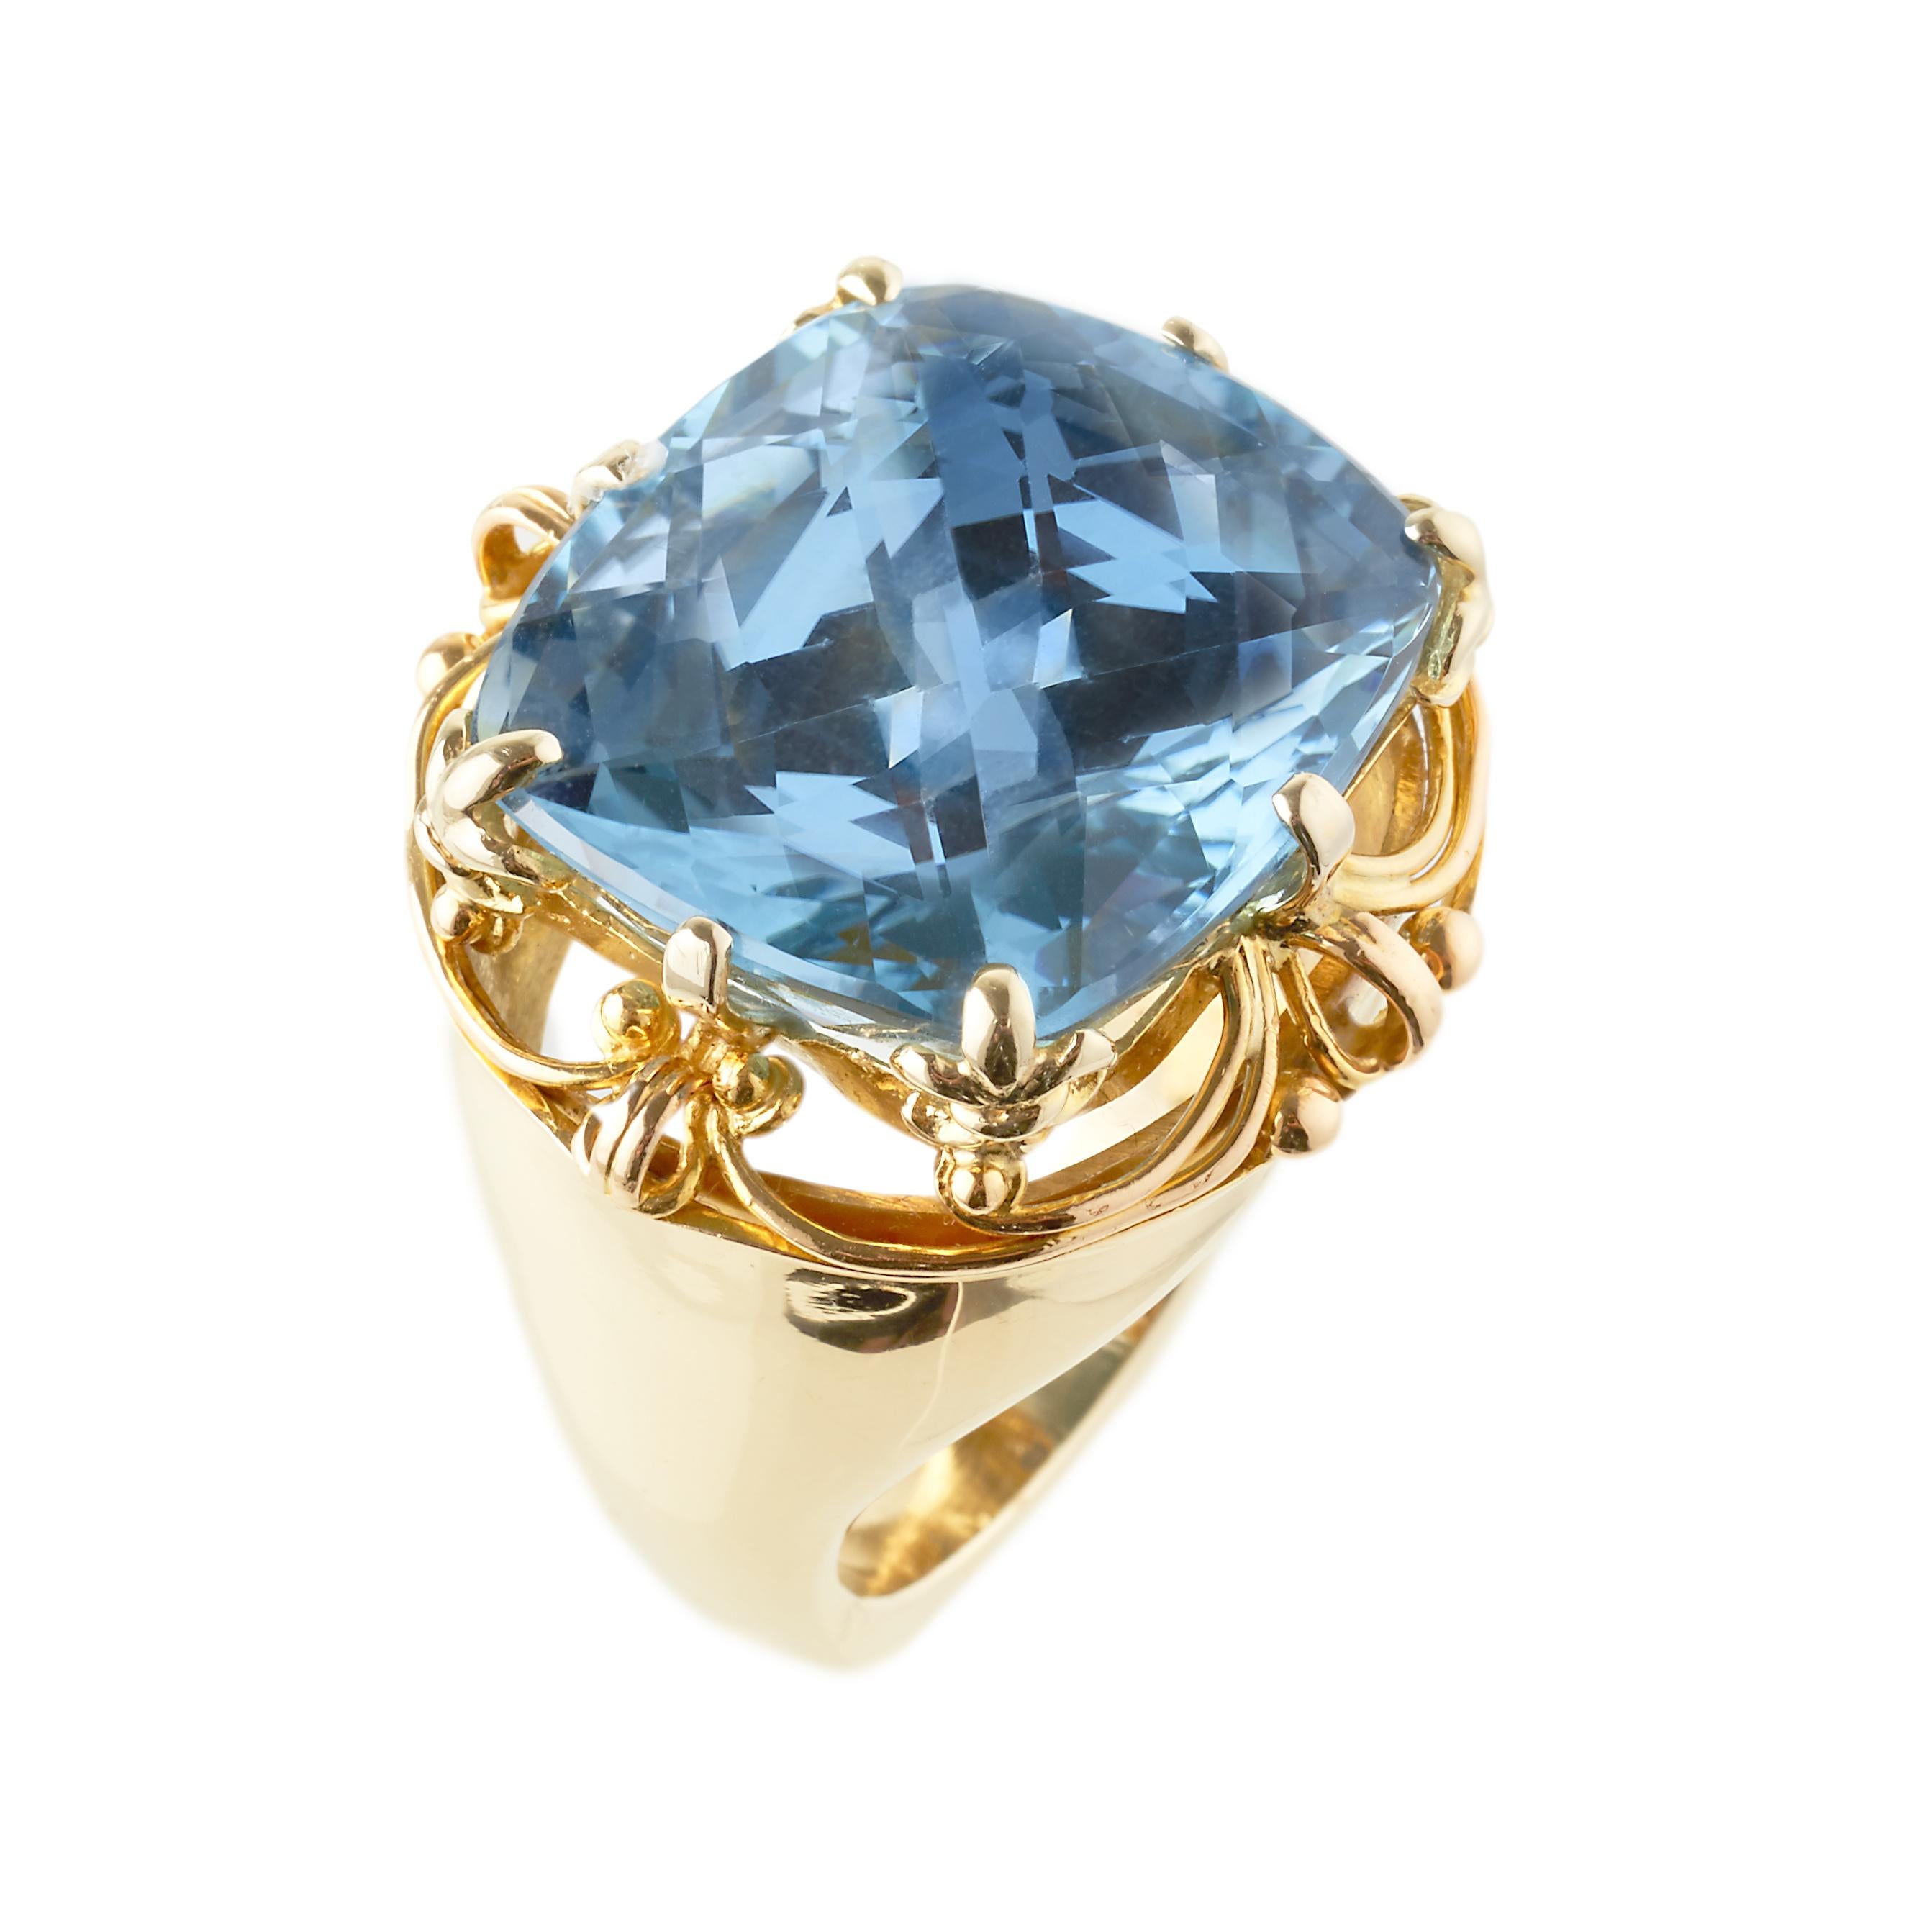 Erin Mac with a large soft blue Quartz 15ct on a French Antique in a contemporary bold shank

15k & 18k yellow gold